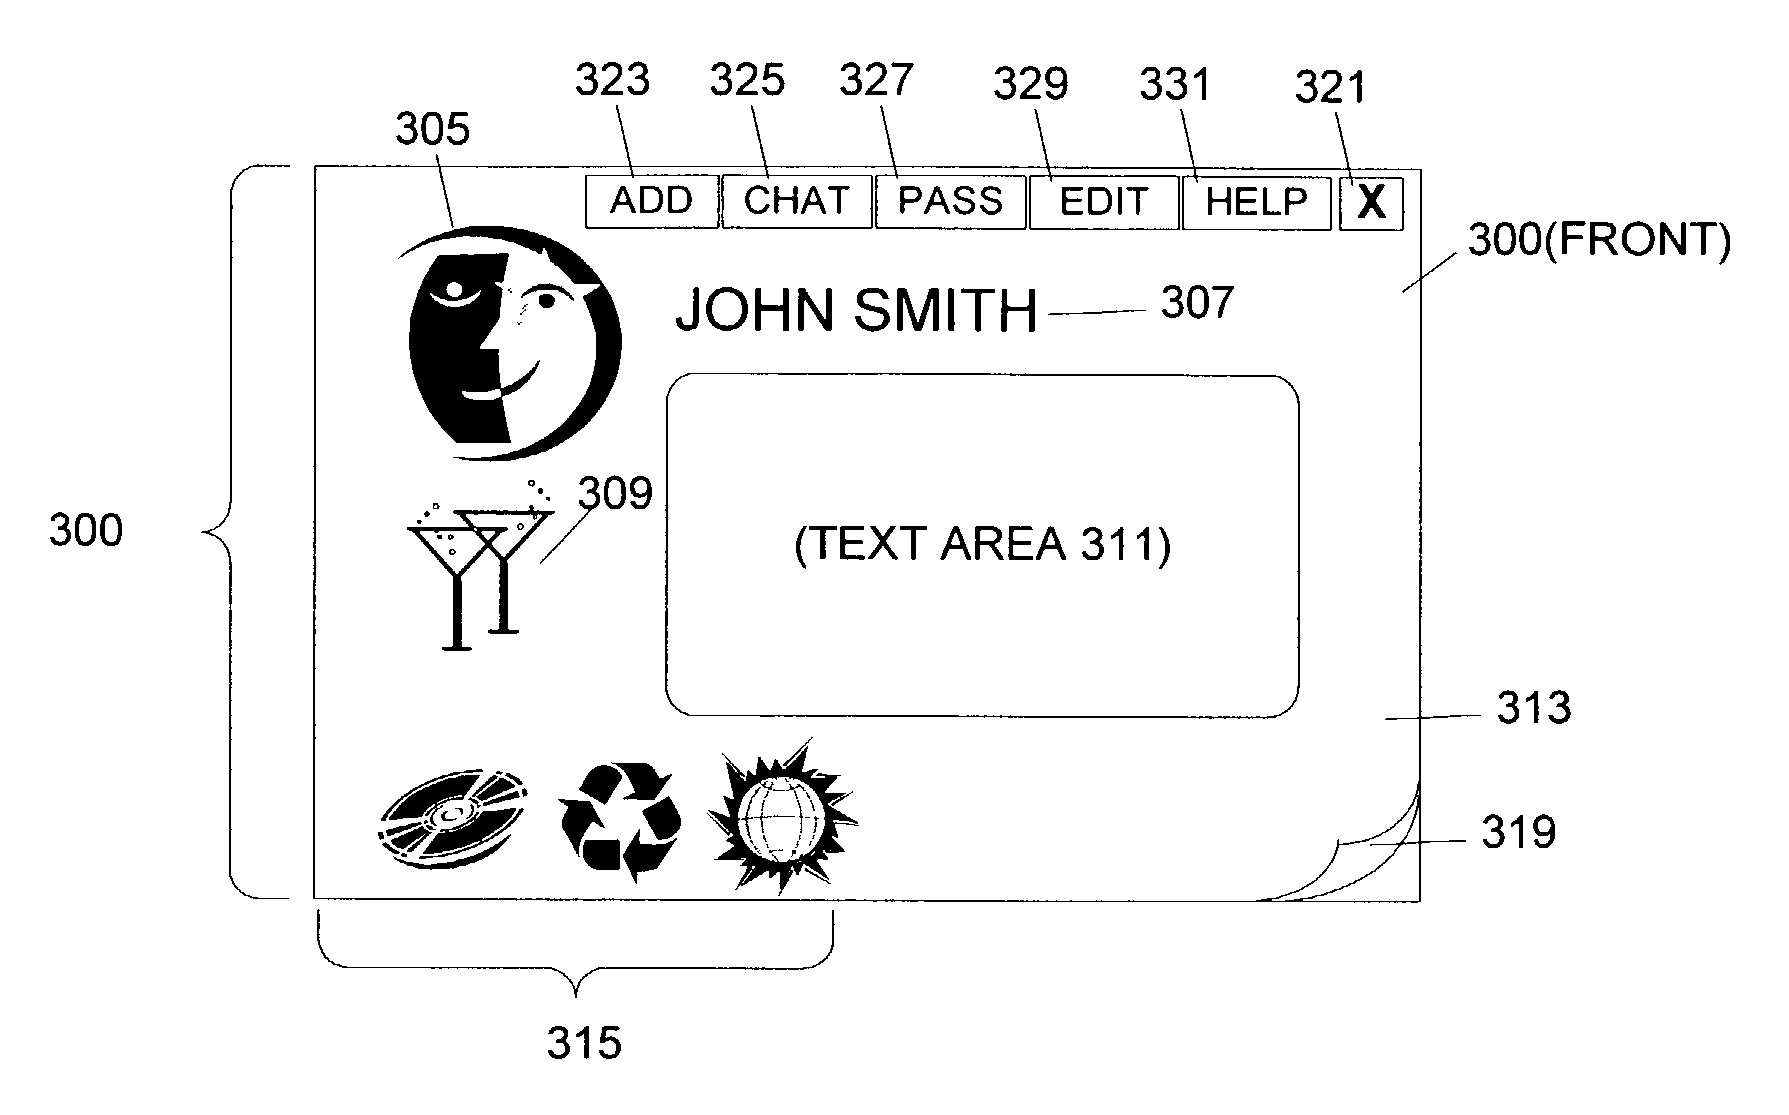 Virtual calling card system and method